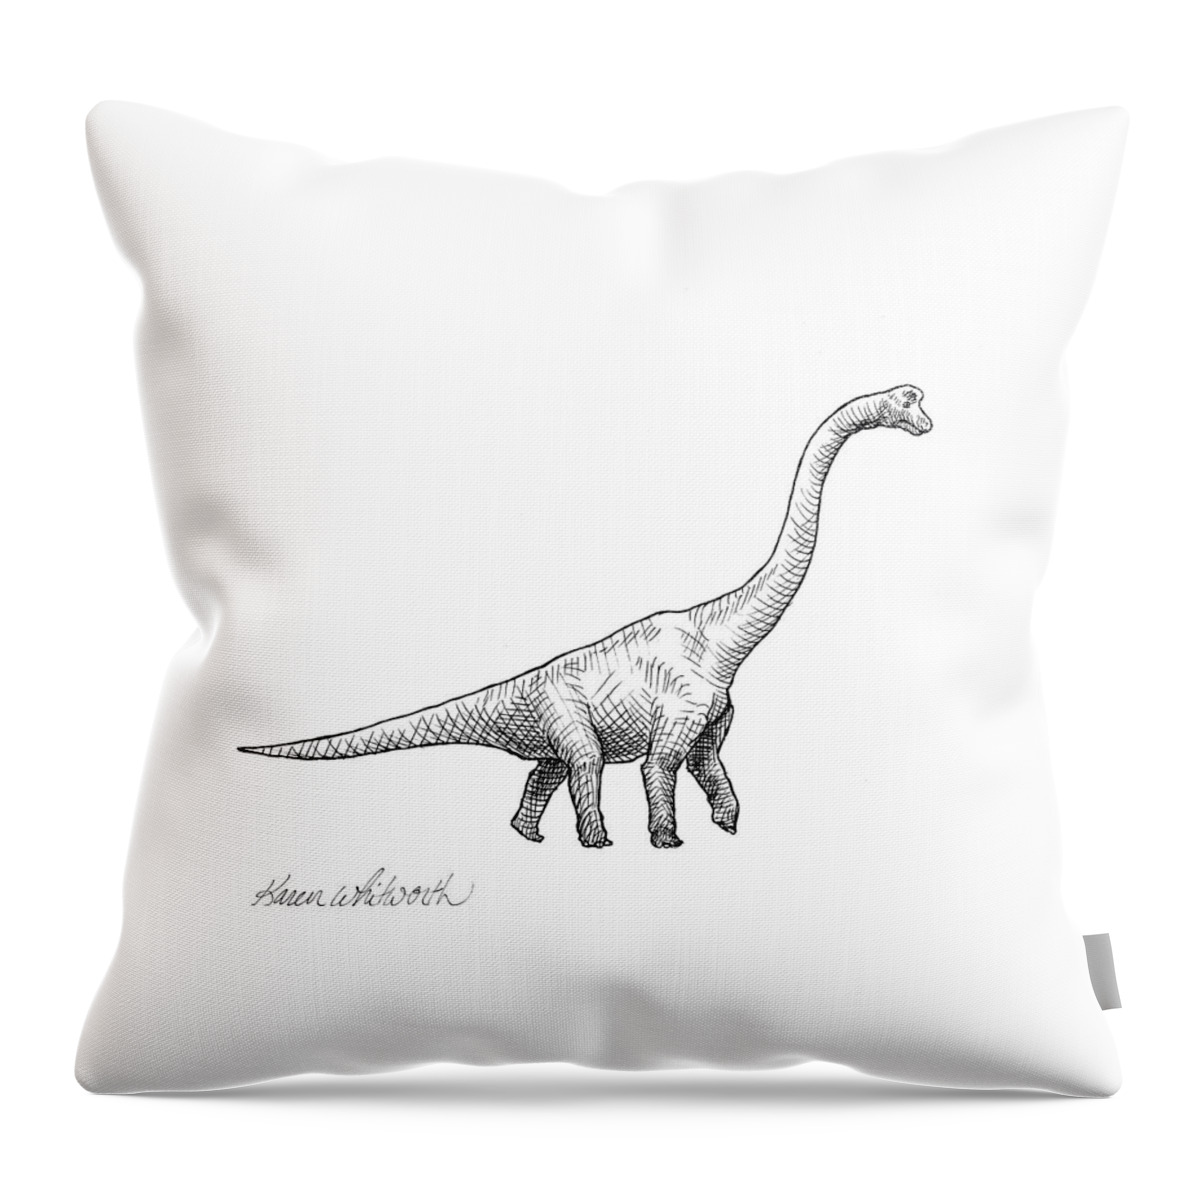 Brachiosaurus Drawing Throw Pillow featuring the drawing Brachiosaurus Dinosaur Black and White Dino Drawing by K Whitworth